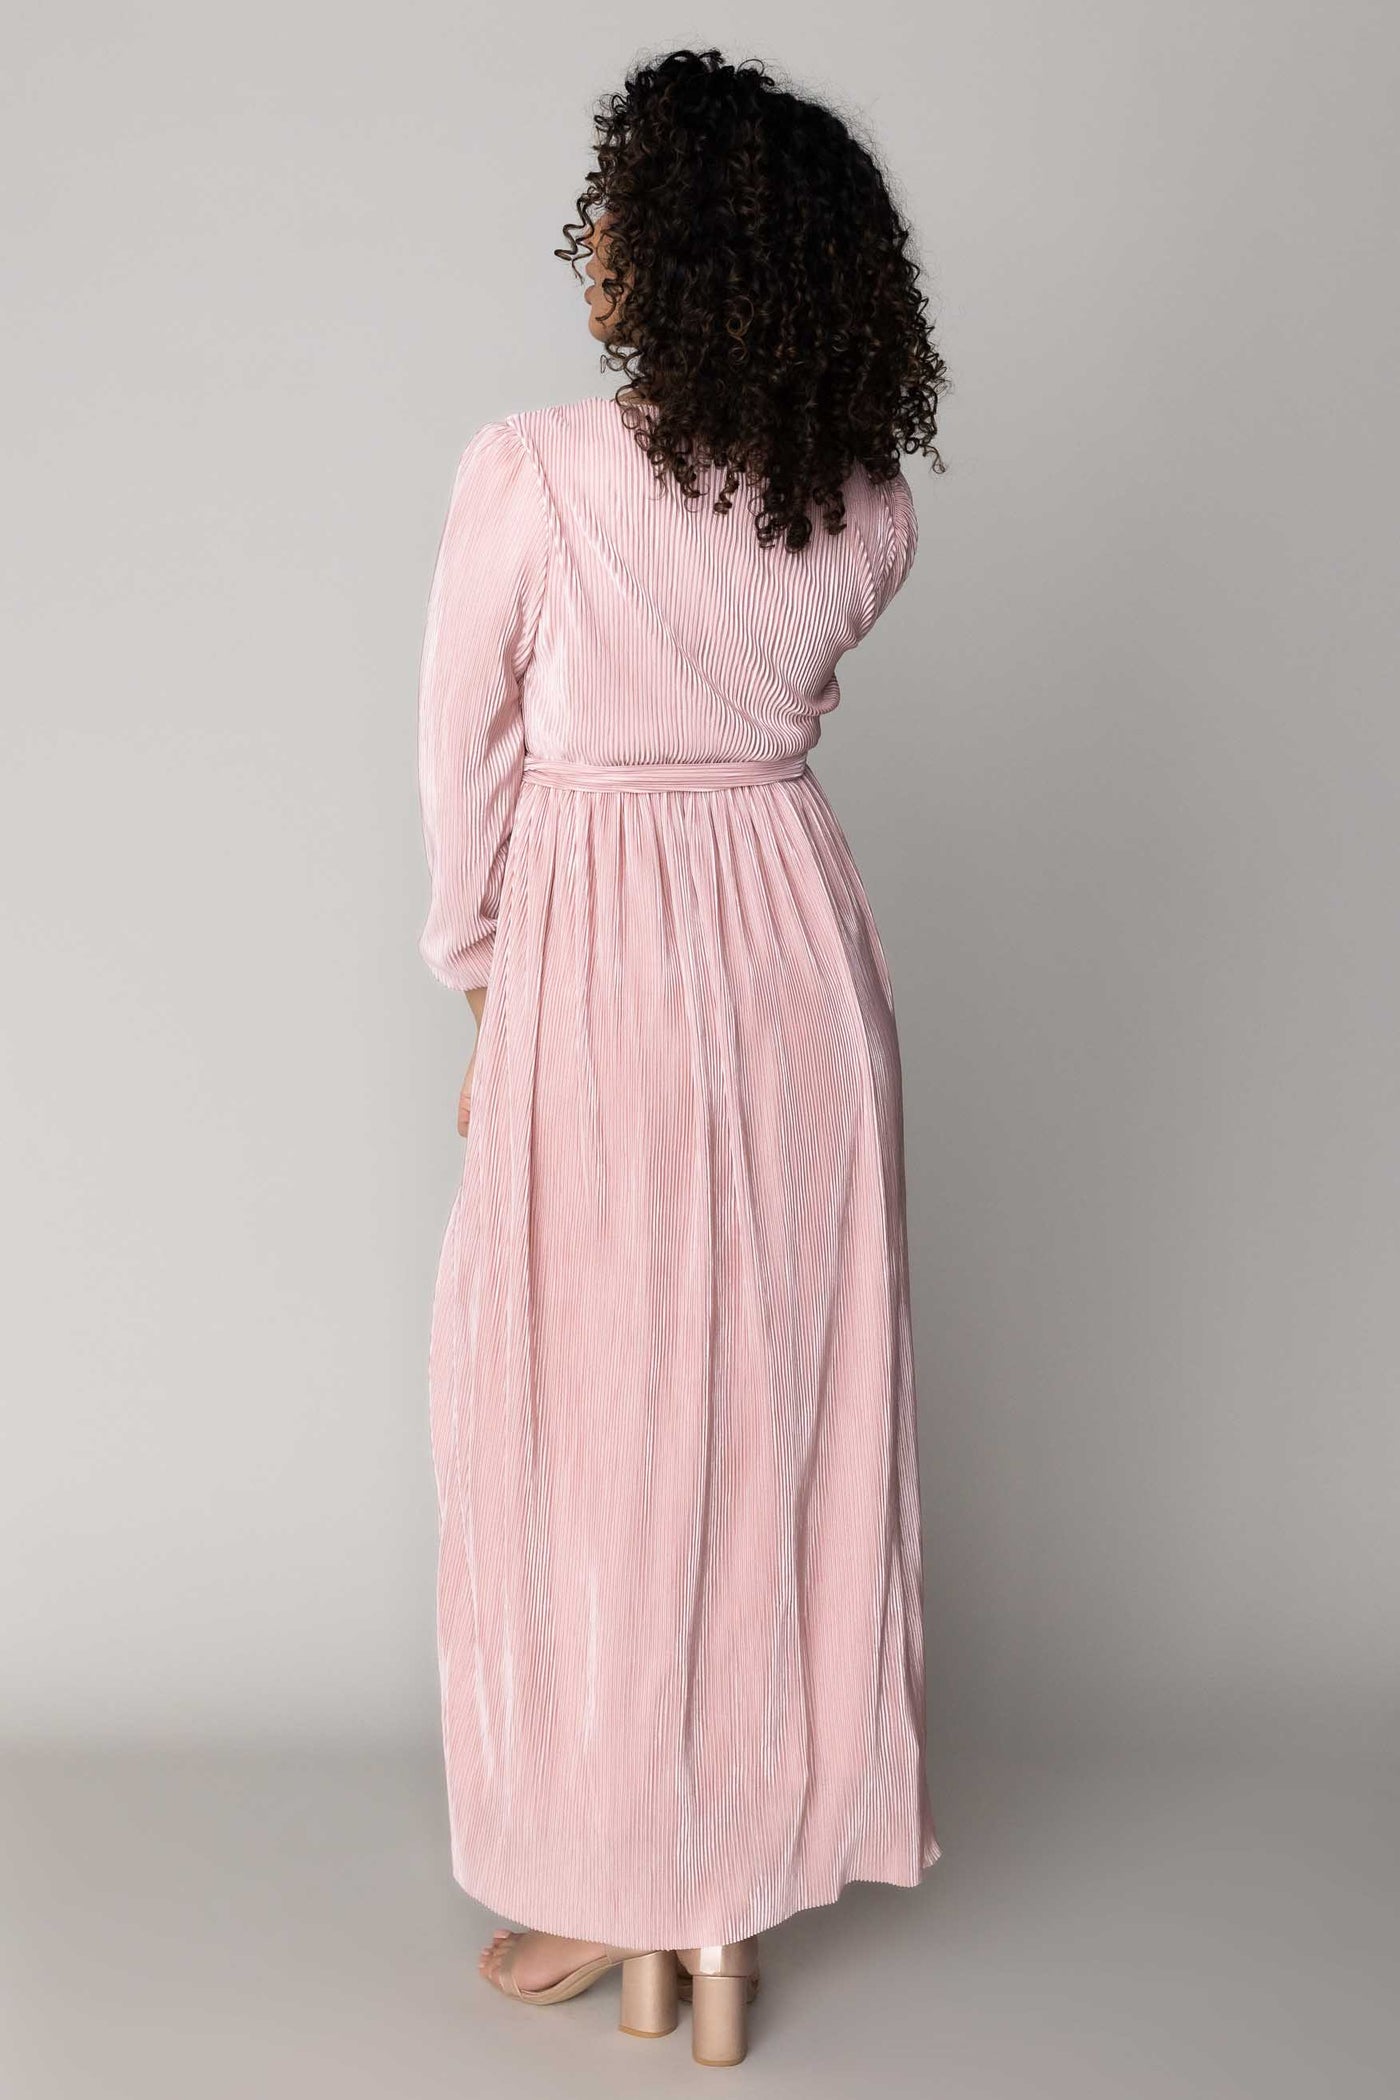 This is a back shot of a modest dress with blush pink details nad a long skirt.